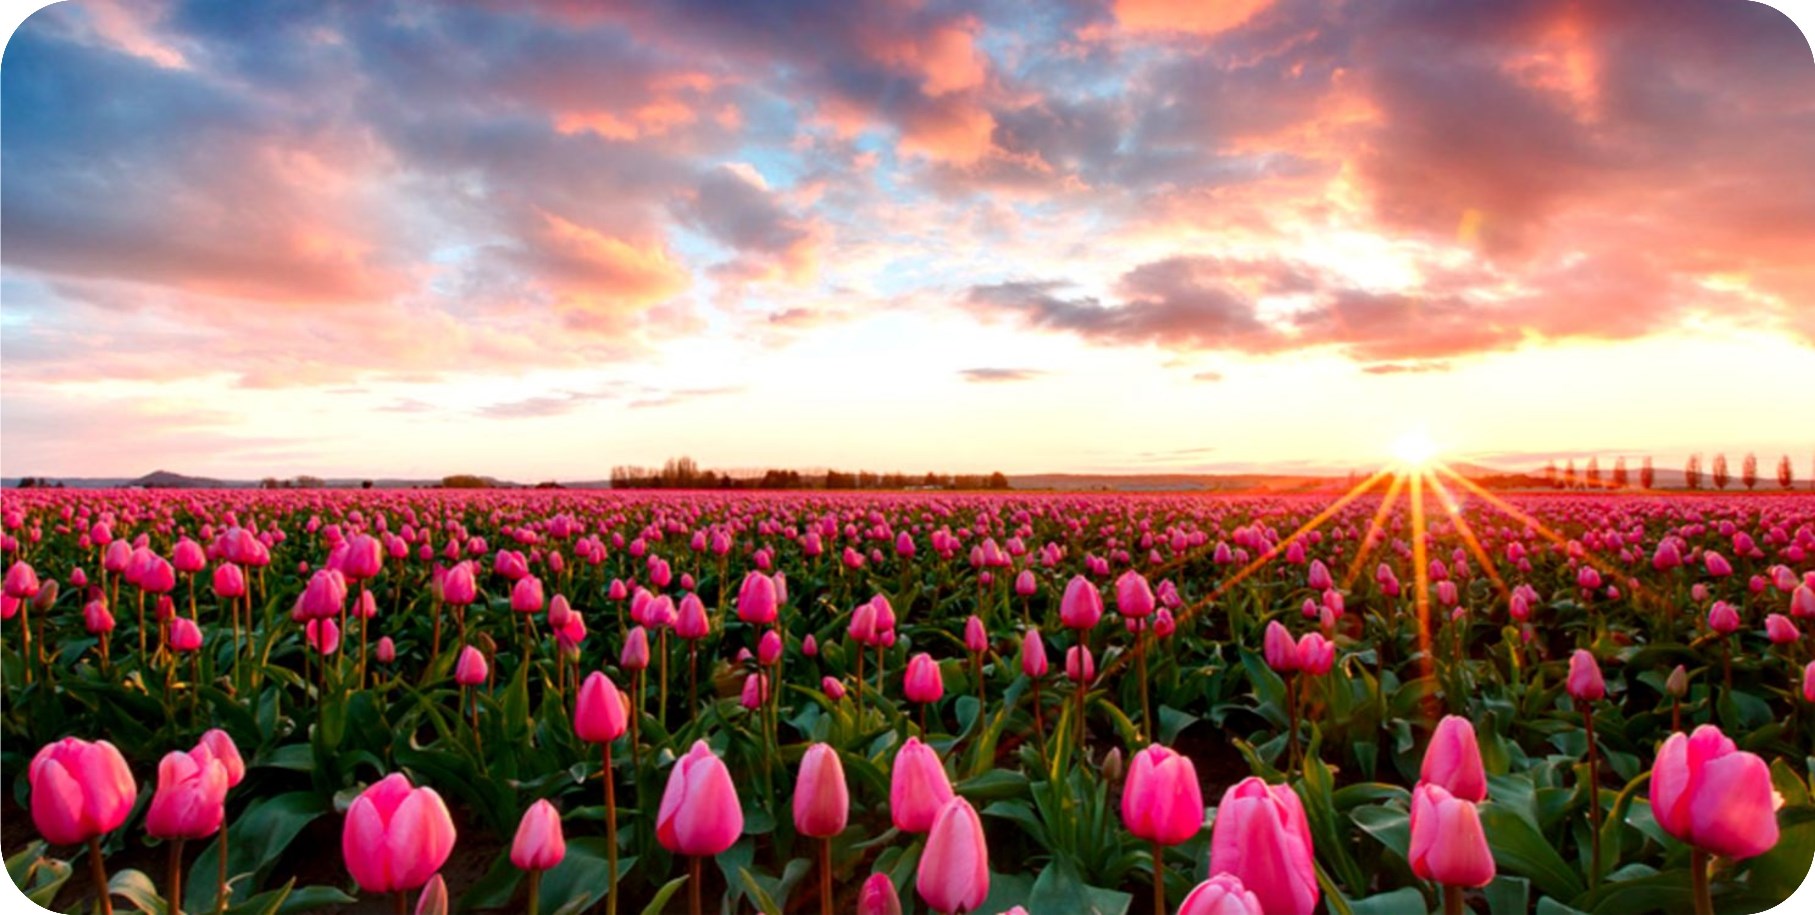 Tulip Field Of FLOWERS Photo License Plate